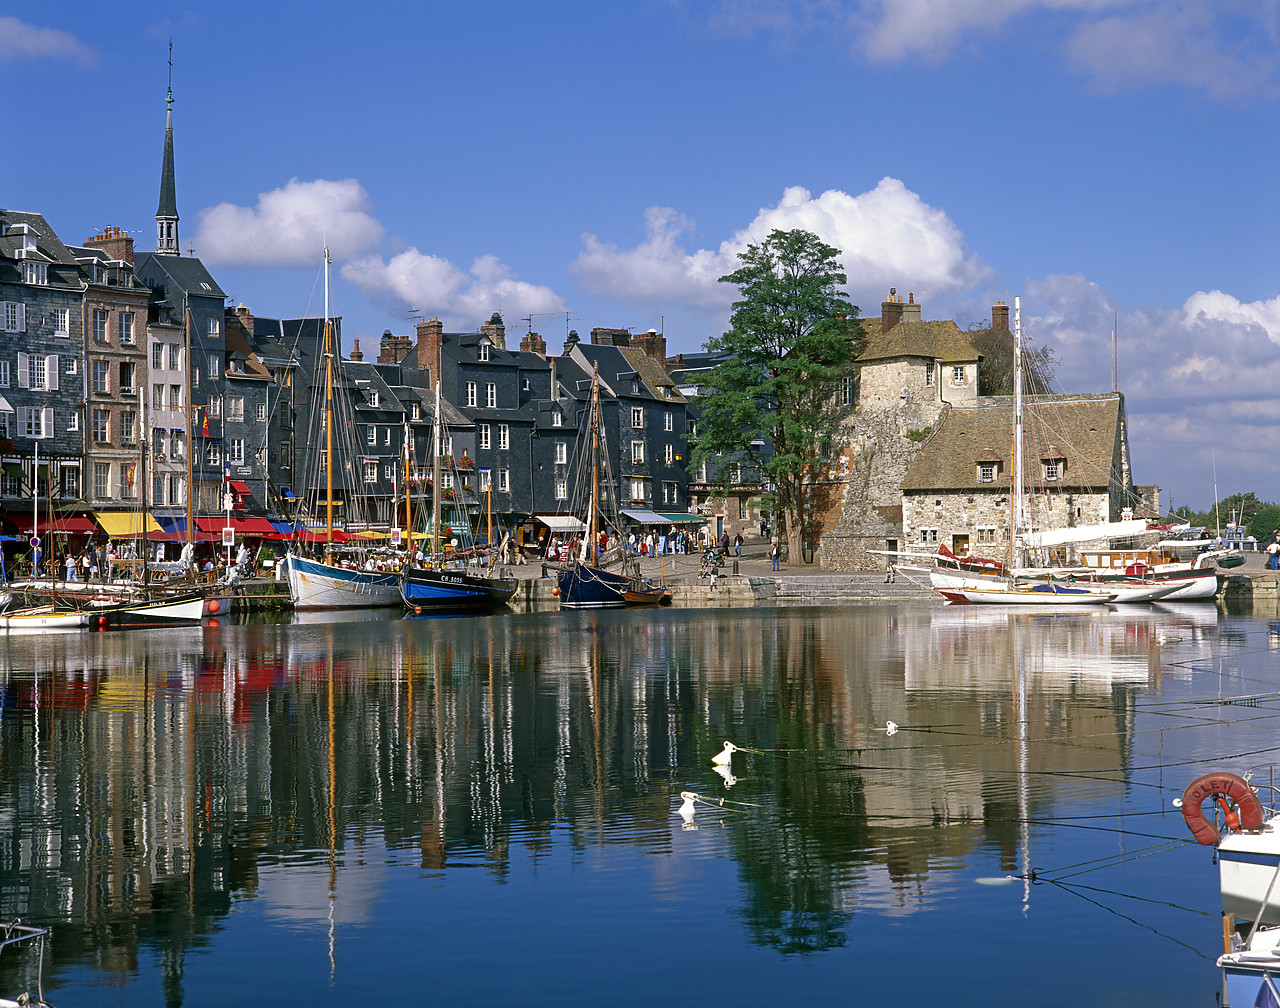 #200256-6 - Boats Reflecting in Harbour, Honfleur, Normandy, France